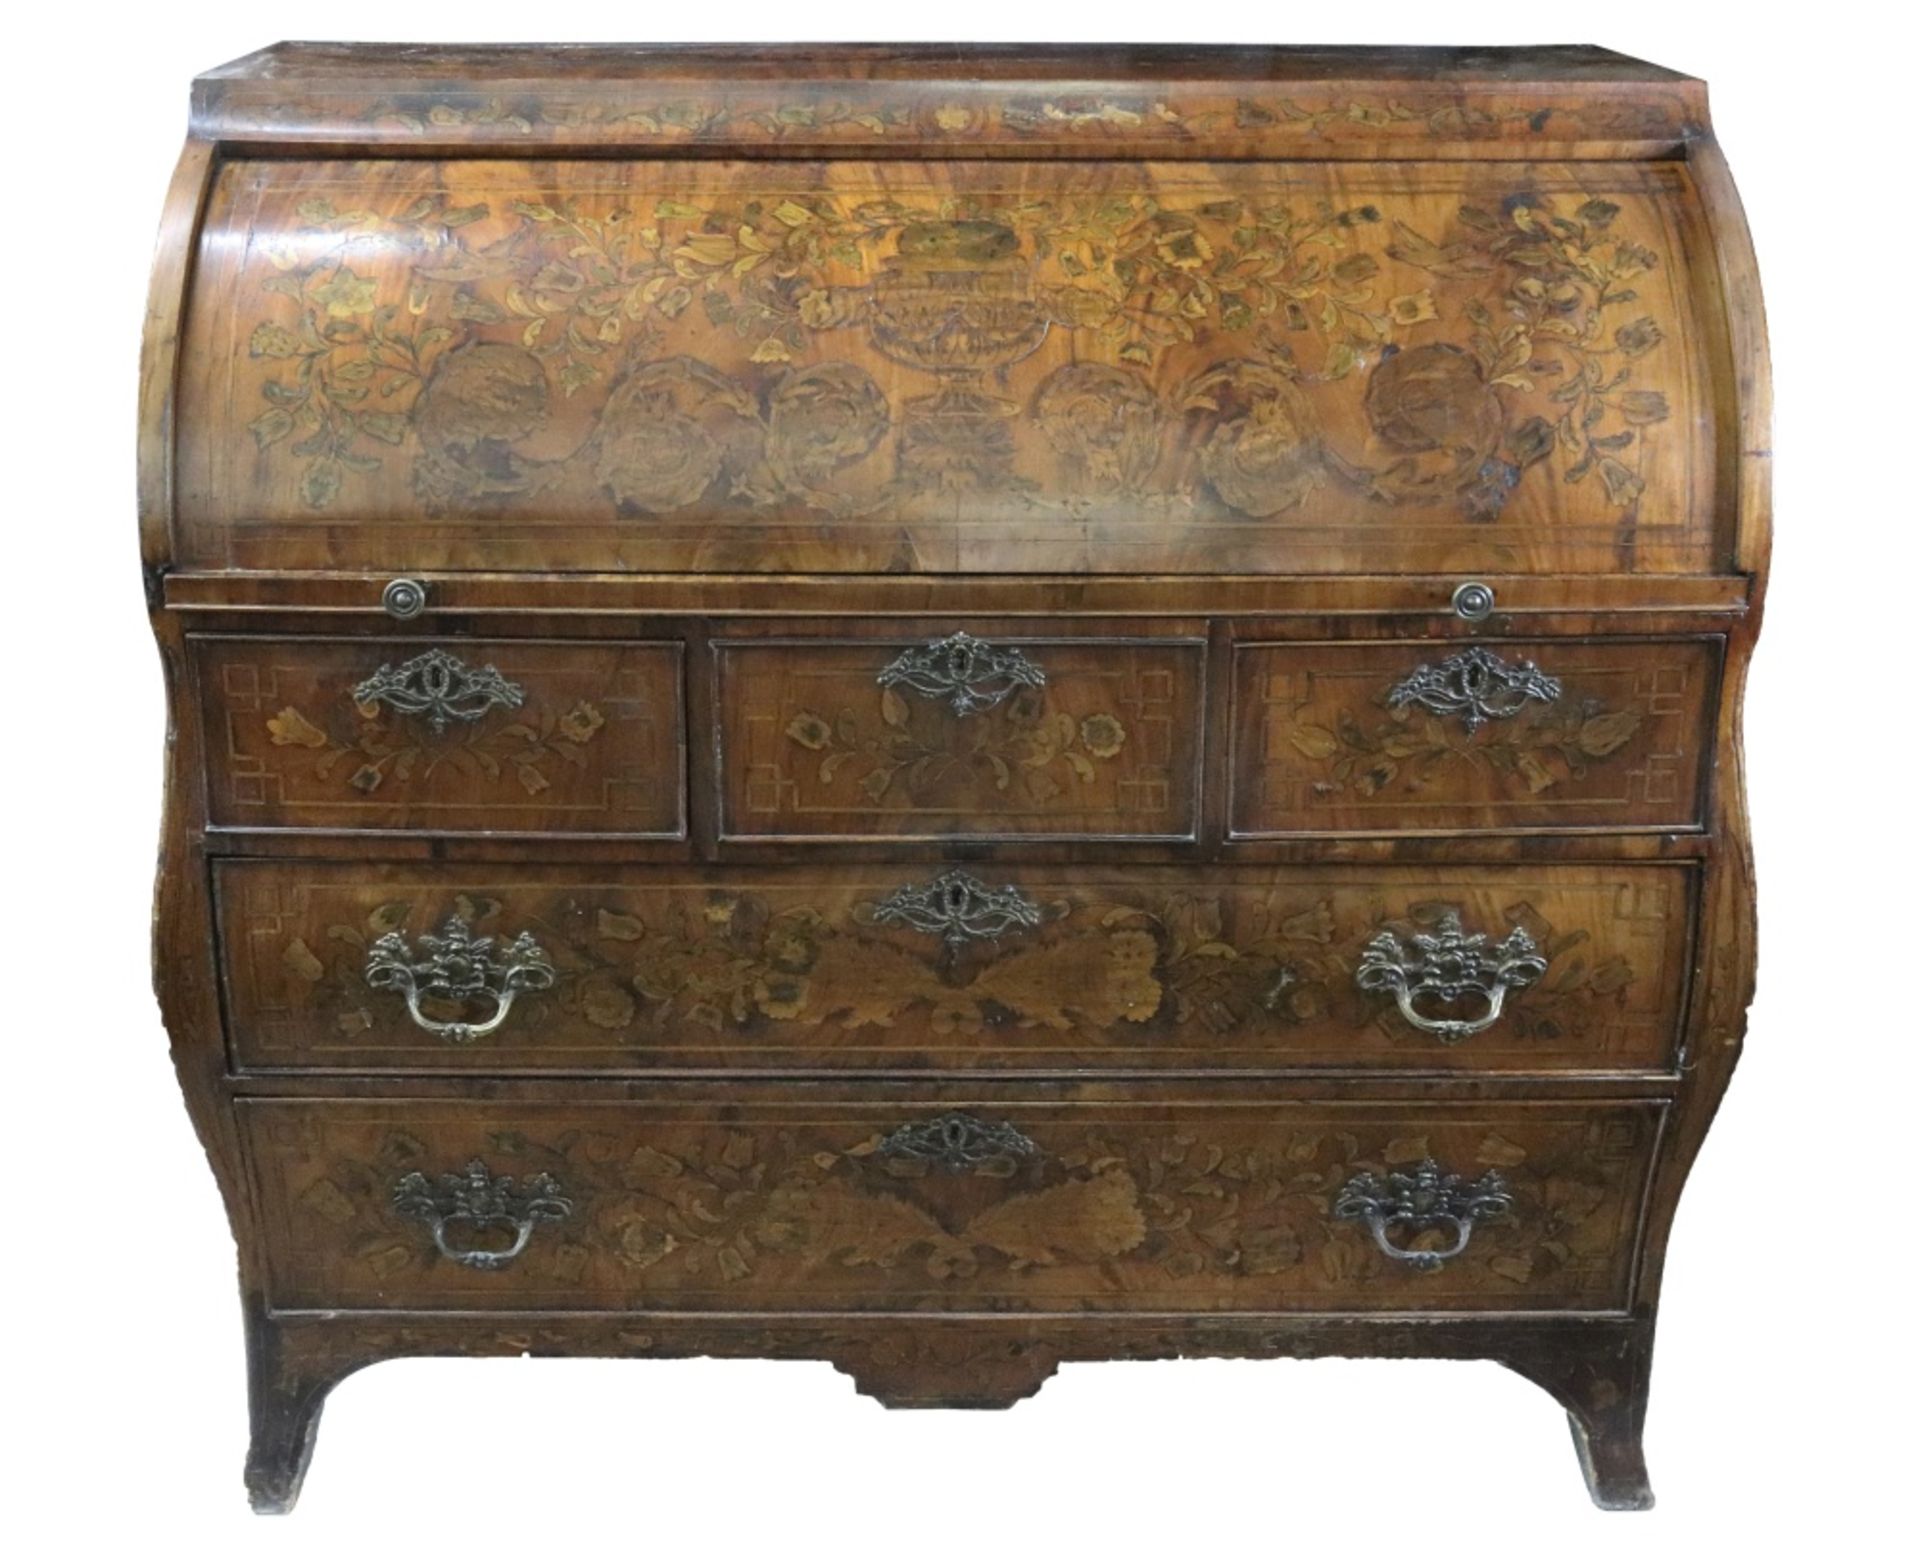 A Dutch walnut floral and bird marquetry cylinder front bombe bureau, late 18th century, - Image 3 of 4